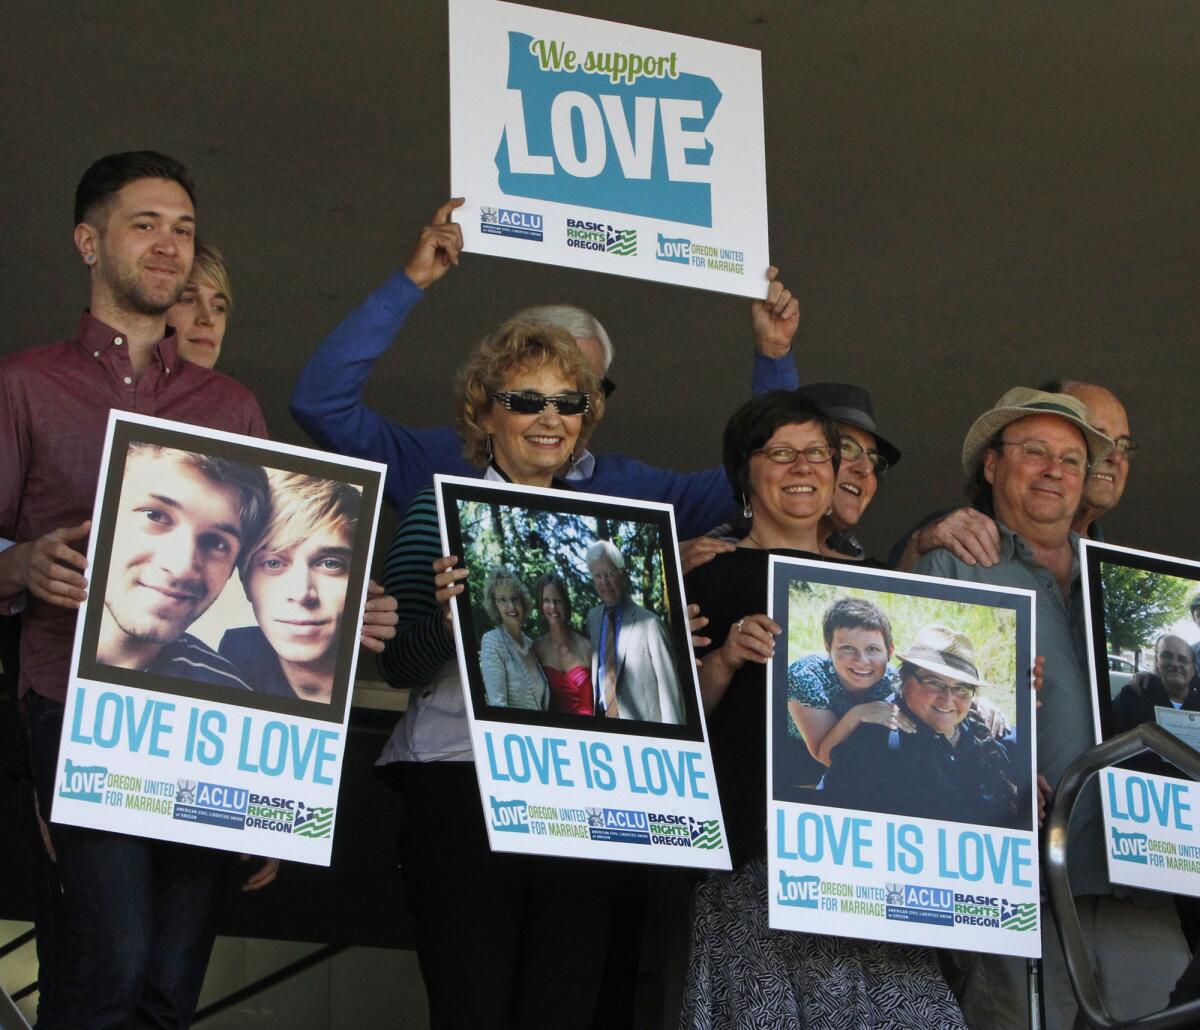 Supporters of same-sex marriage hold photos of themselves and their family members or partners at a federal courthouse in Eugene, Ore., last week.